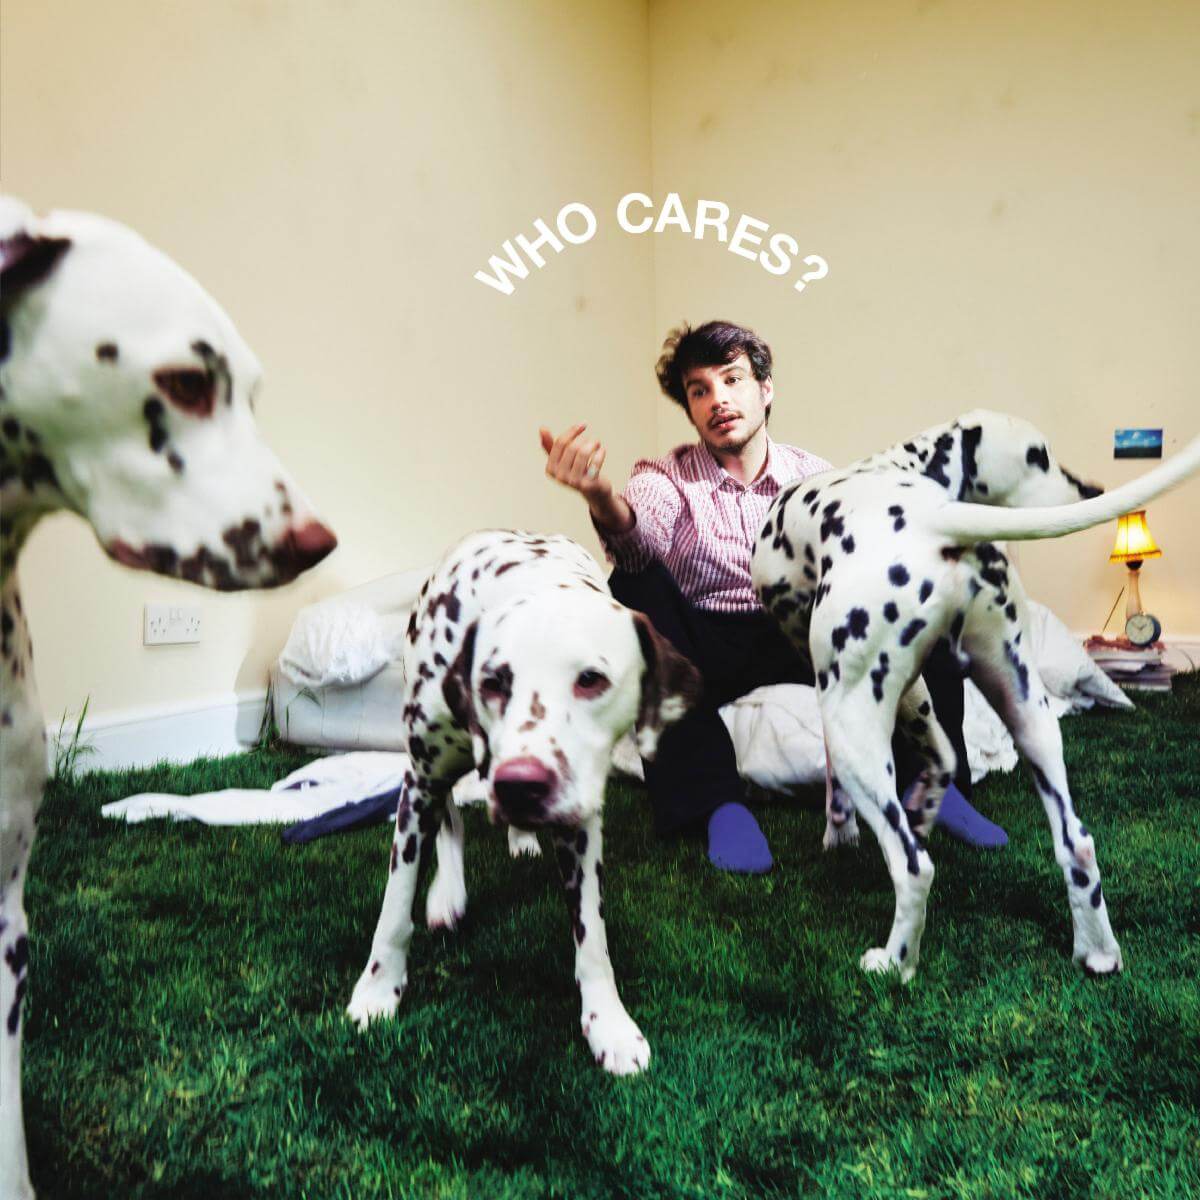 'Who Cares? by Rex Orange County Album Review by Greg Walker for Northern Transmissions